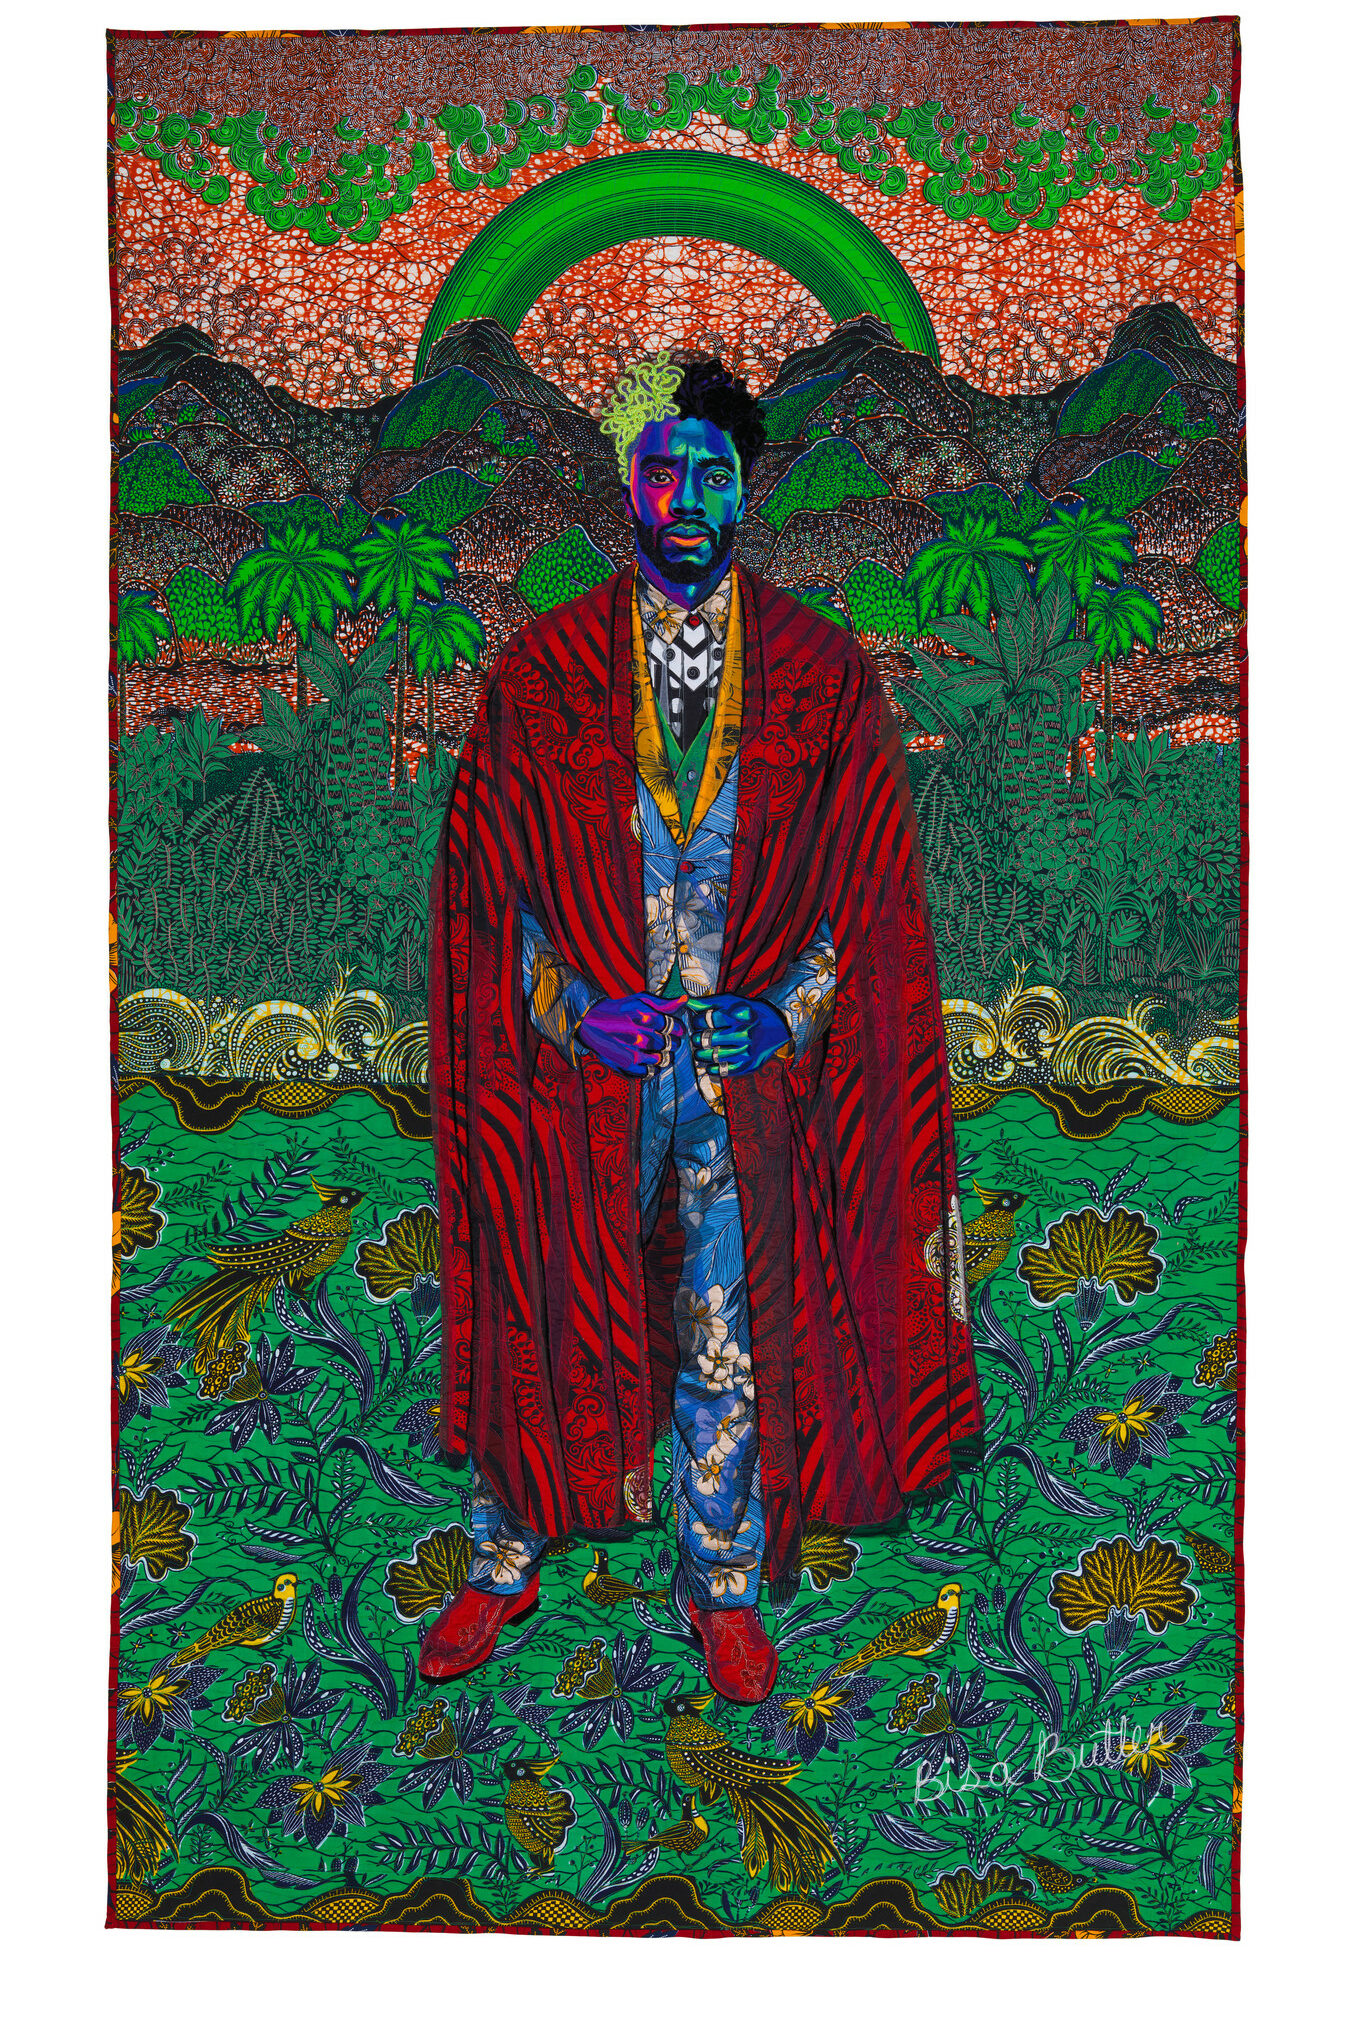 Bisa Butler, Forever, 2020, cotton, silk, wool, and velvet quilted and appliquéd, 86 × 42 in., Los Angeles County Museum of Art, gift of D'Rita and Robbie Robinson, © Bisa Butler, photo © Museum Associates/LACMA